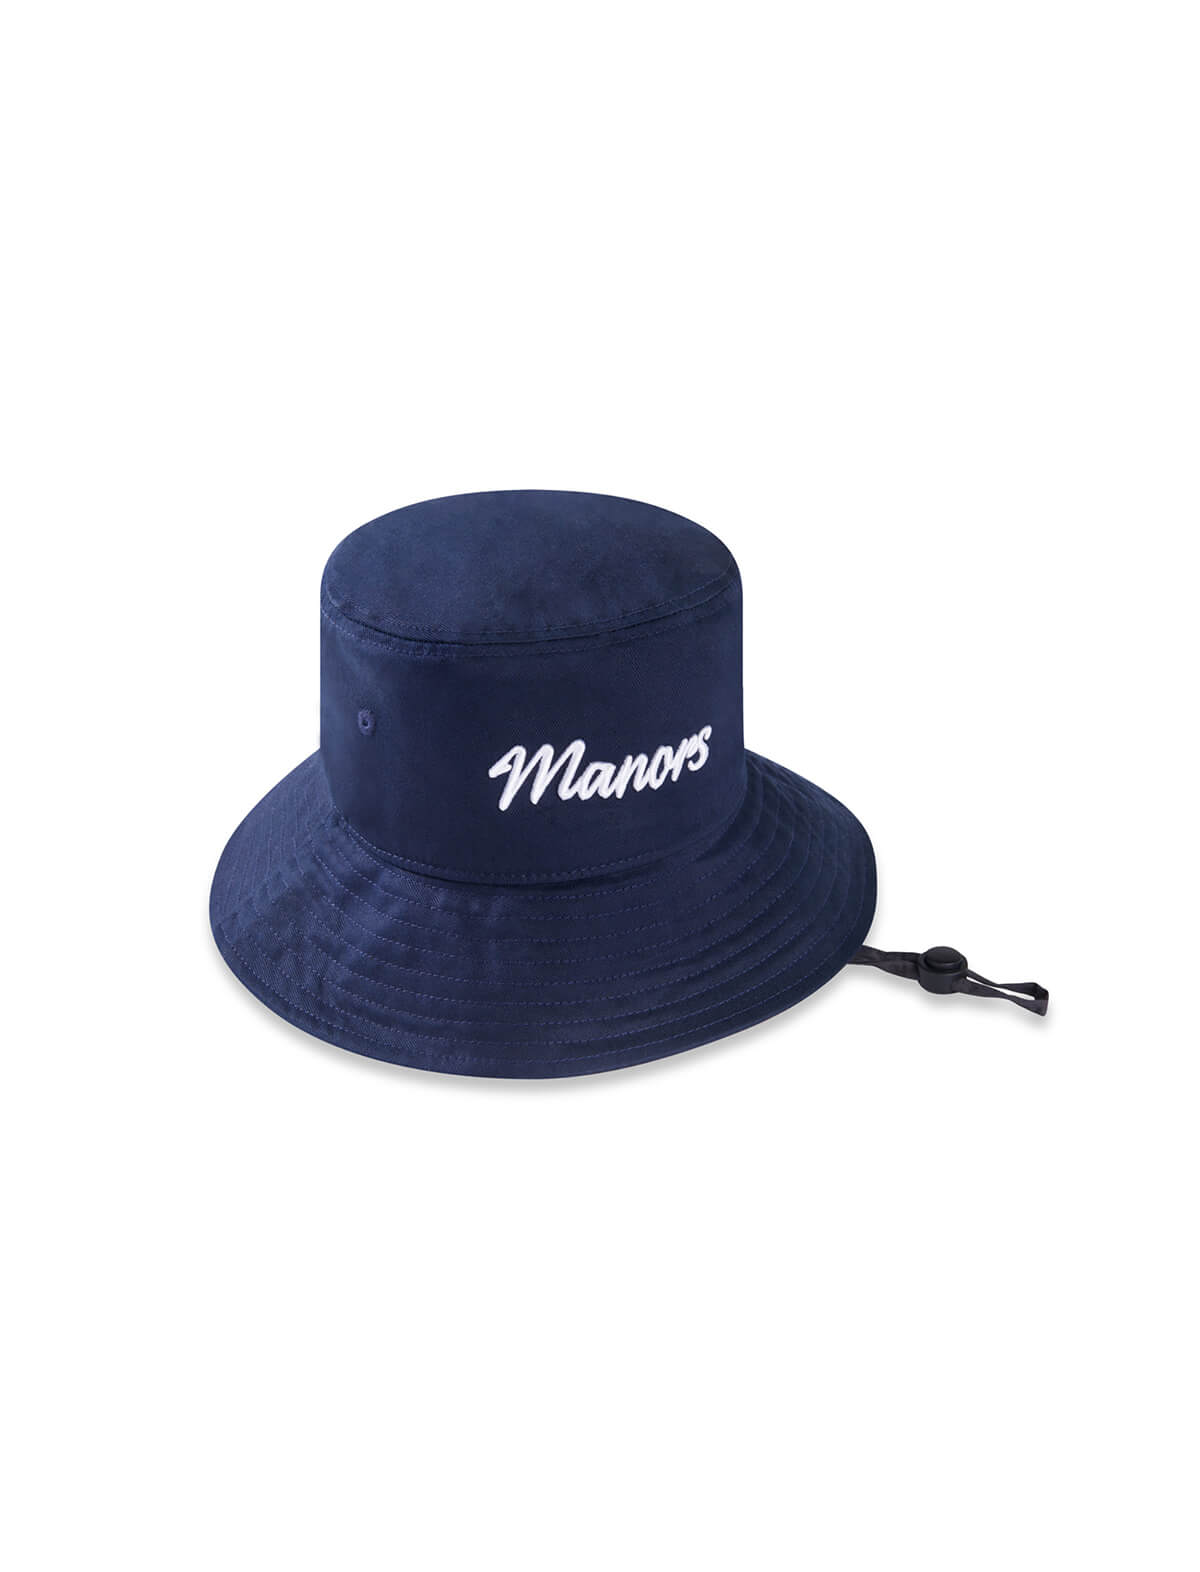 MANORS GOLF Classic Bucket Hat in Navy